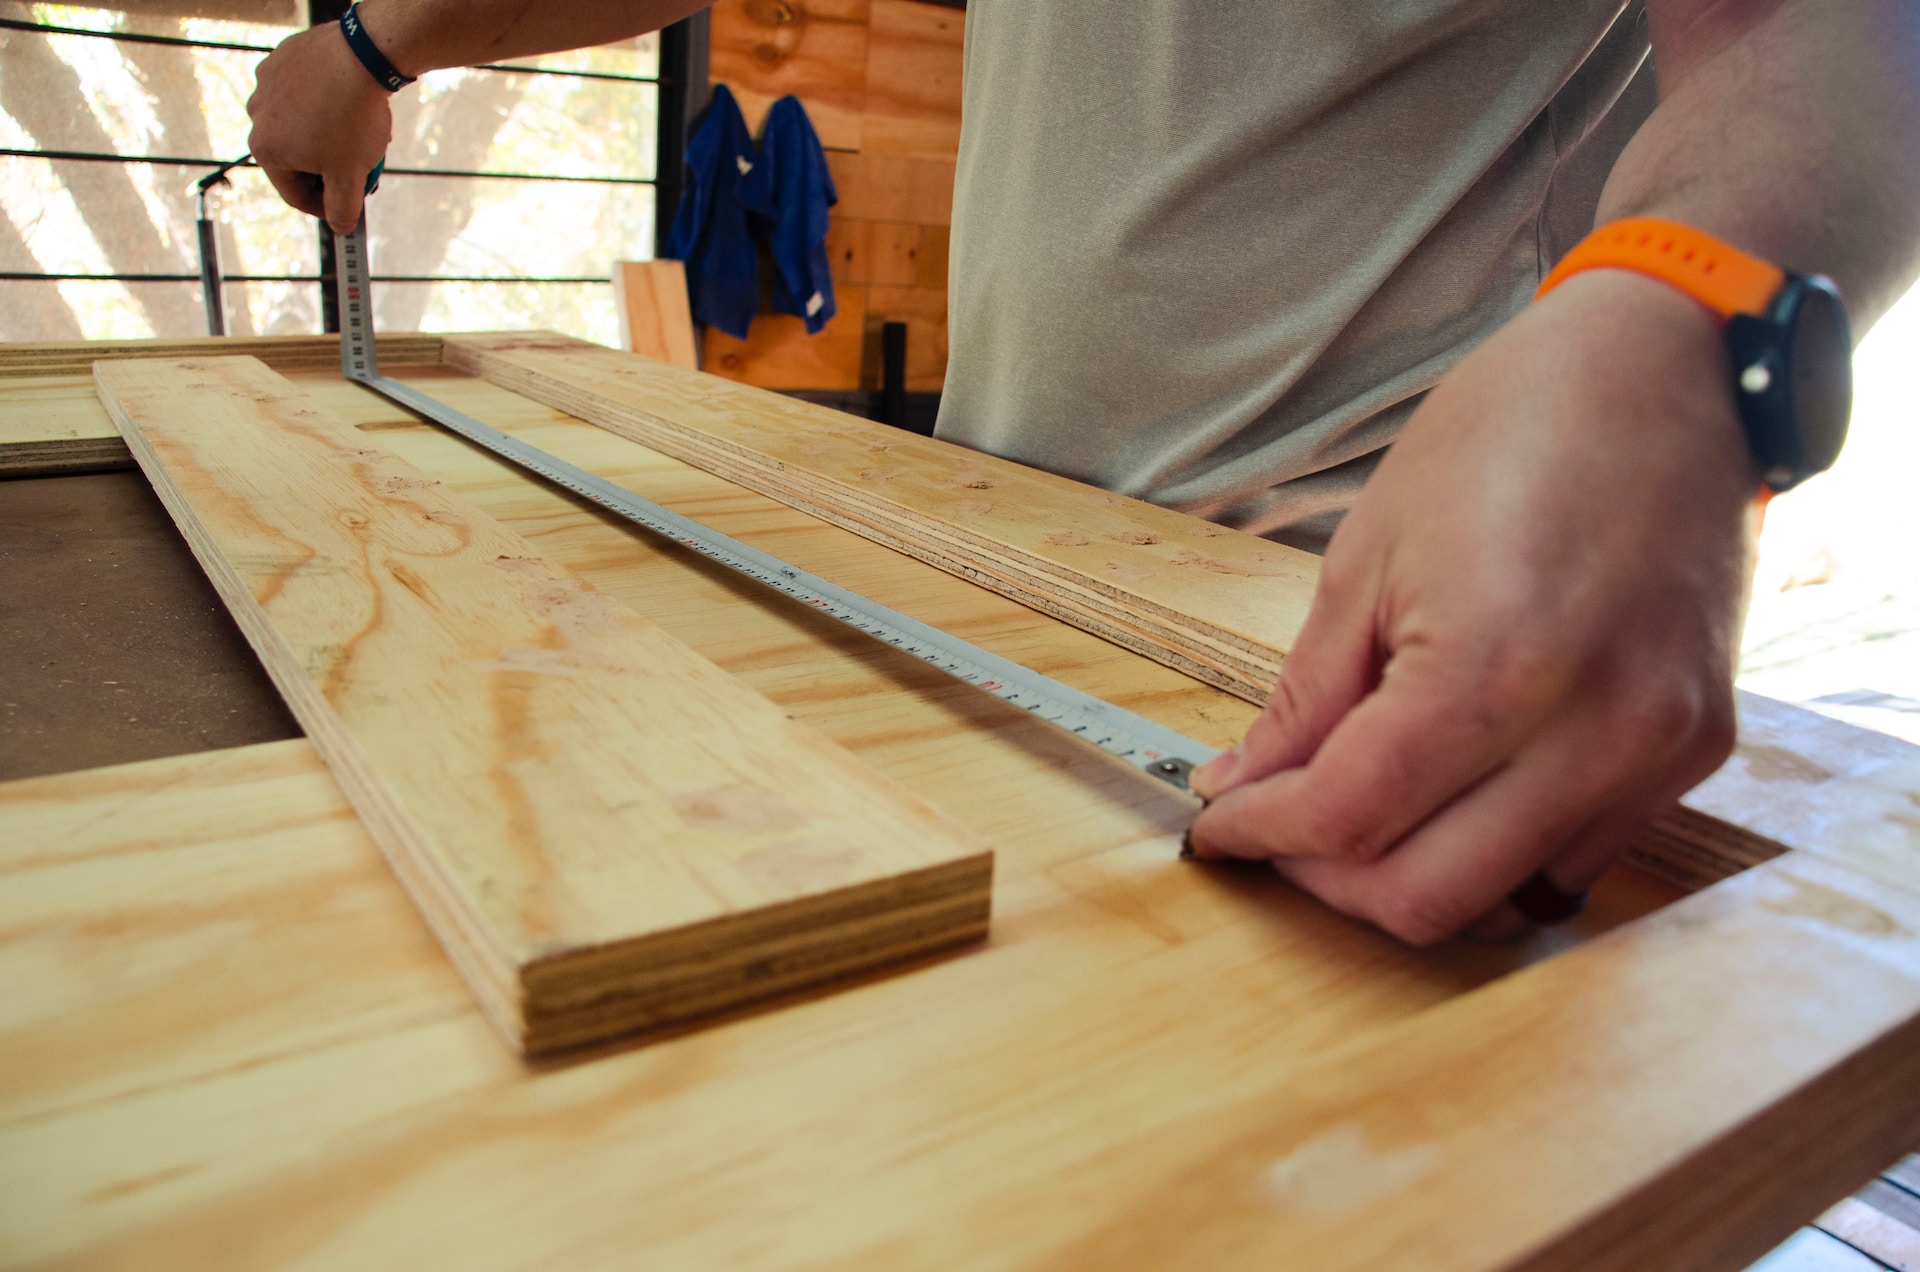 carpentry courses programs for international students in australia - ezy workforce and education